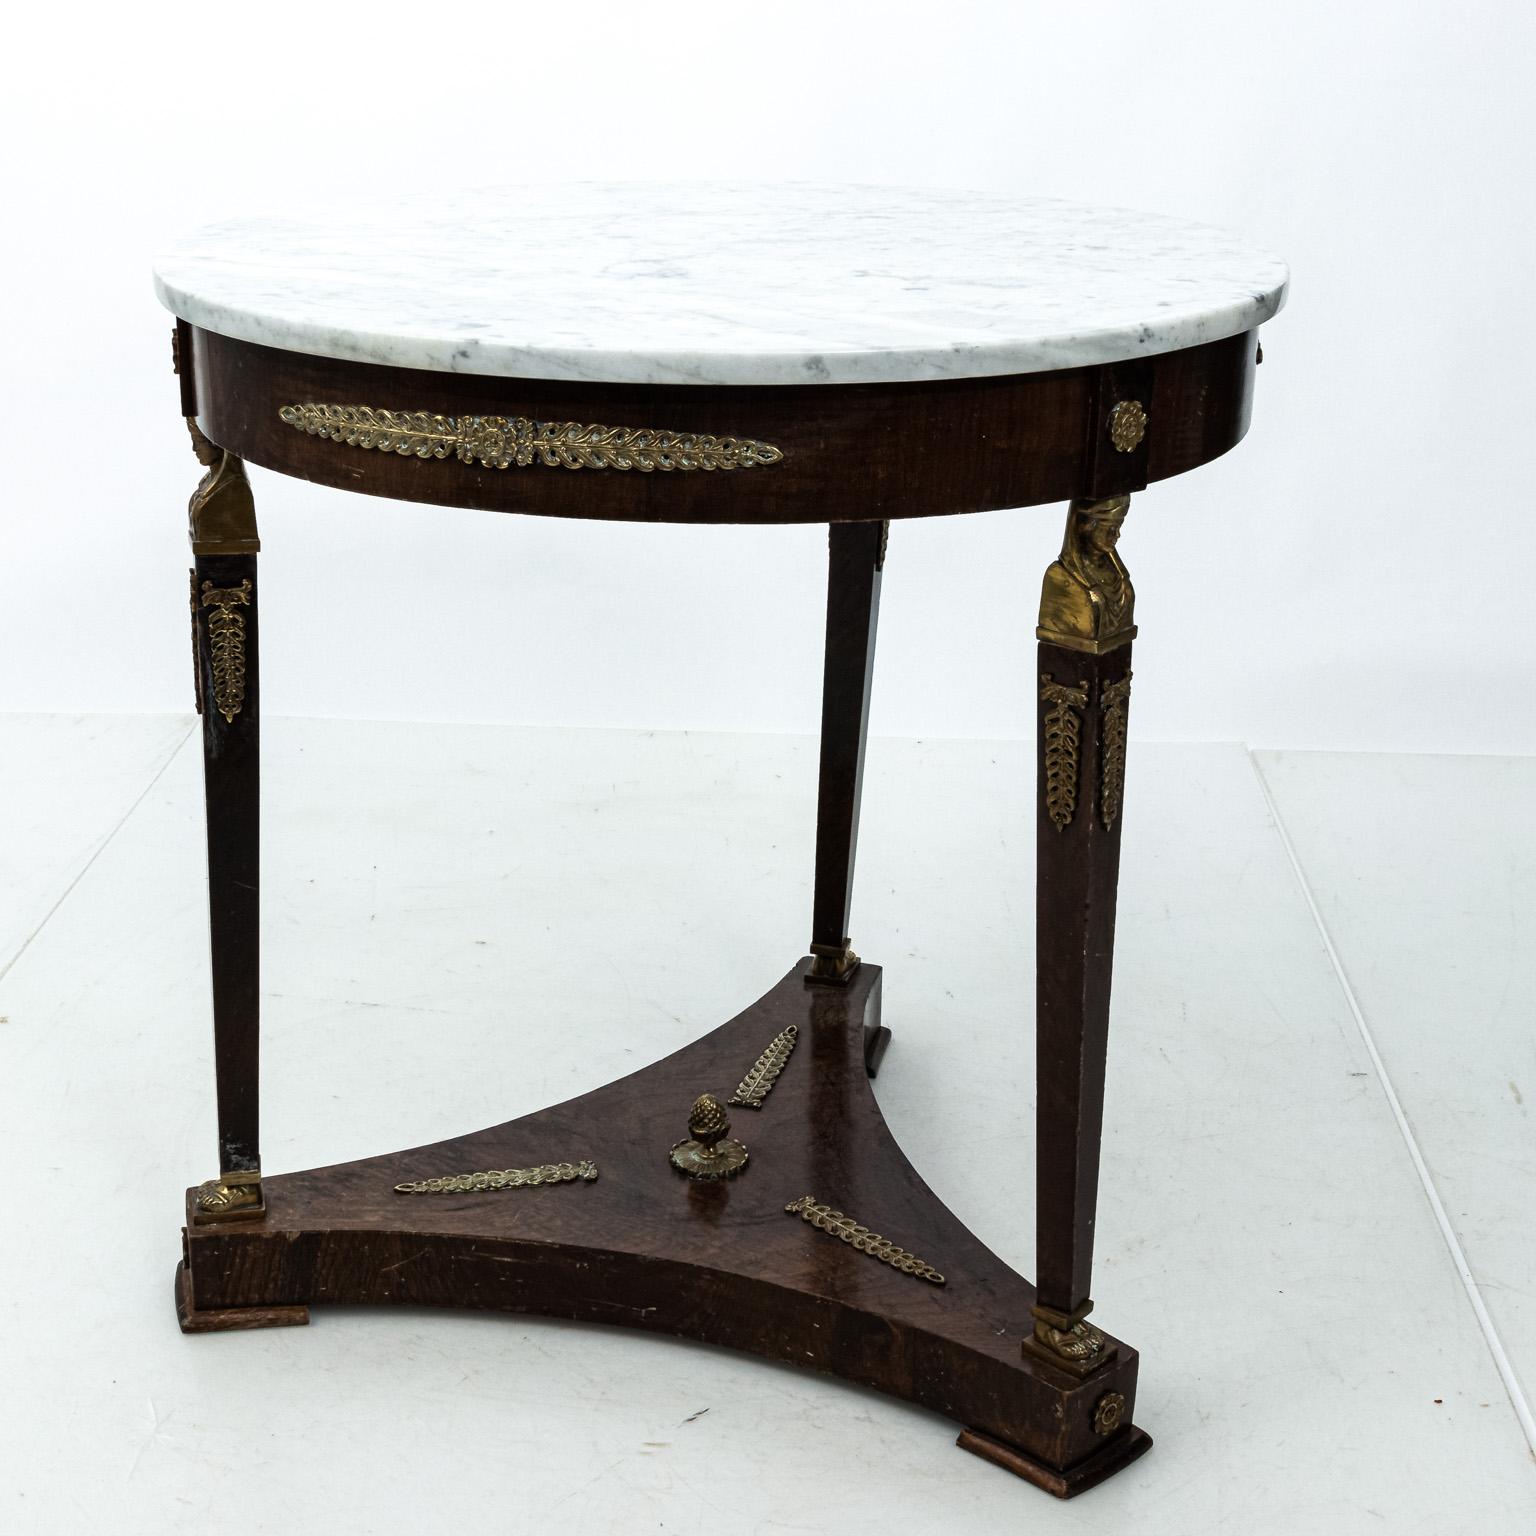 20th Century French Marble-Top Gueridon Table